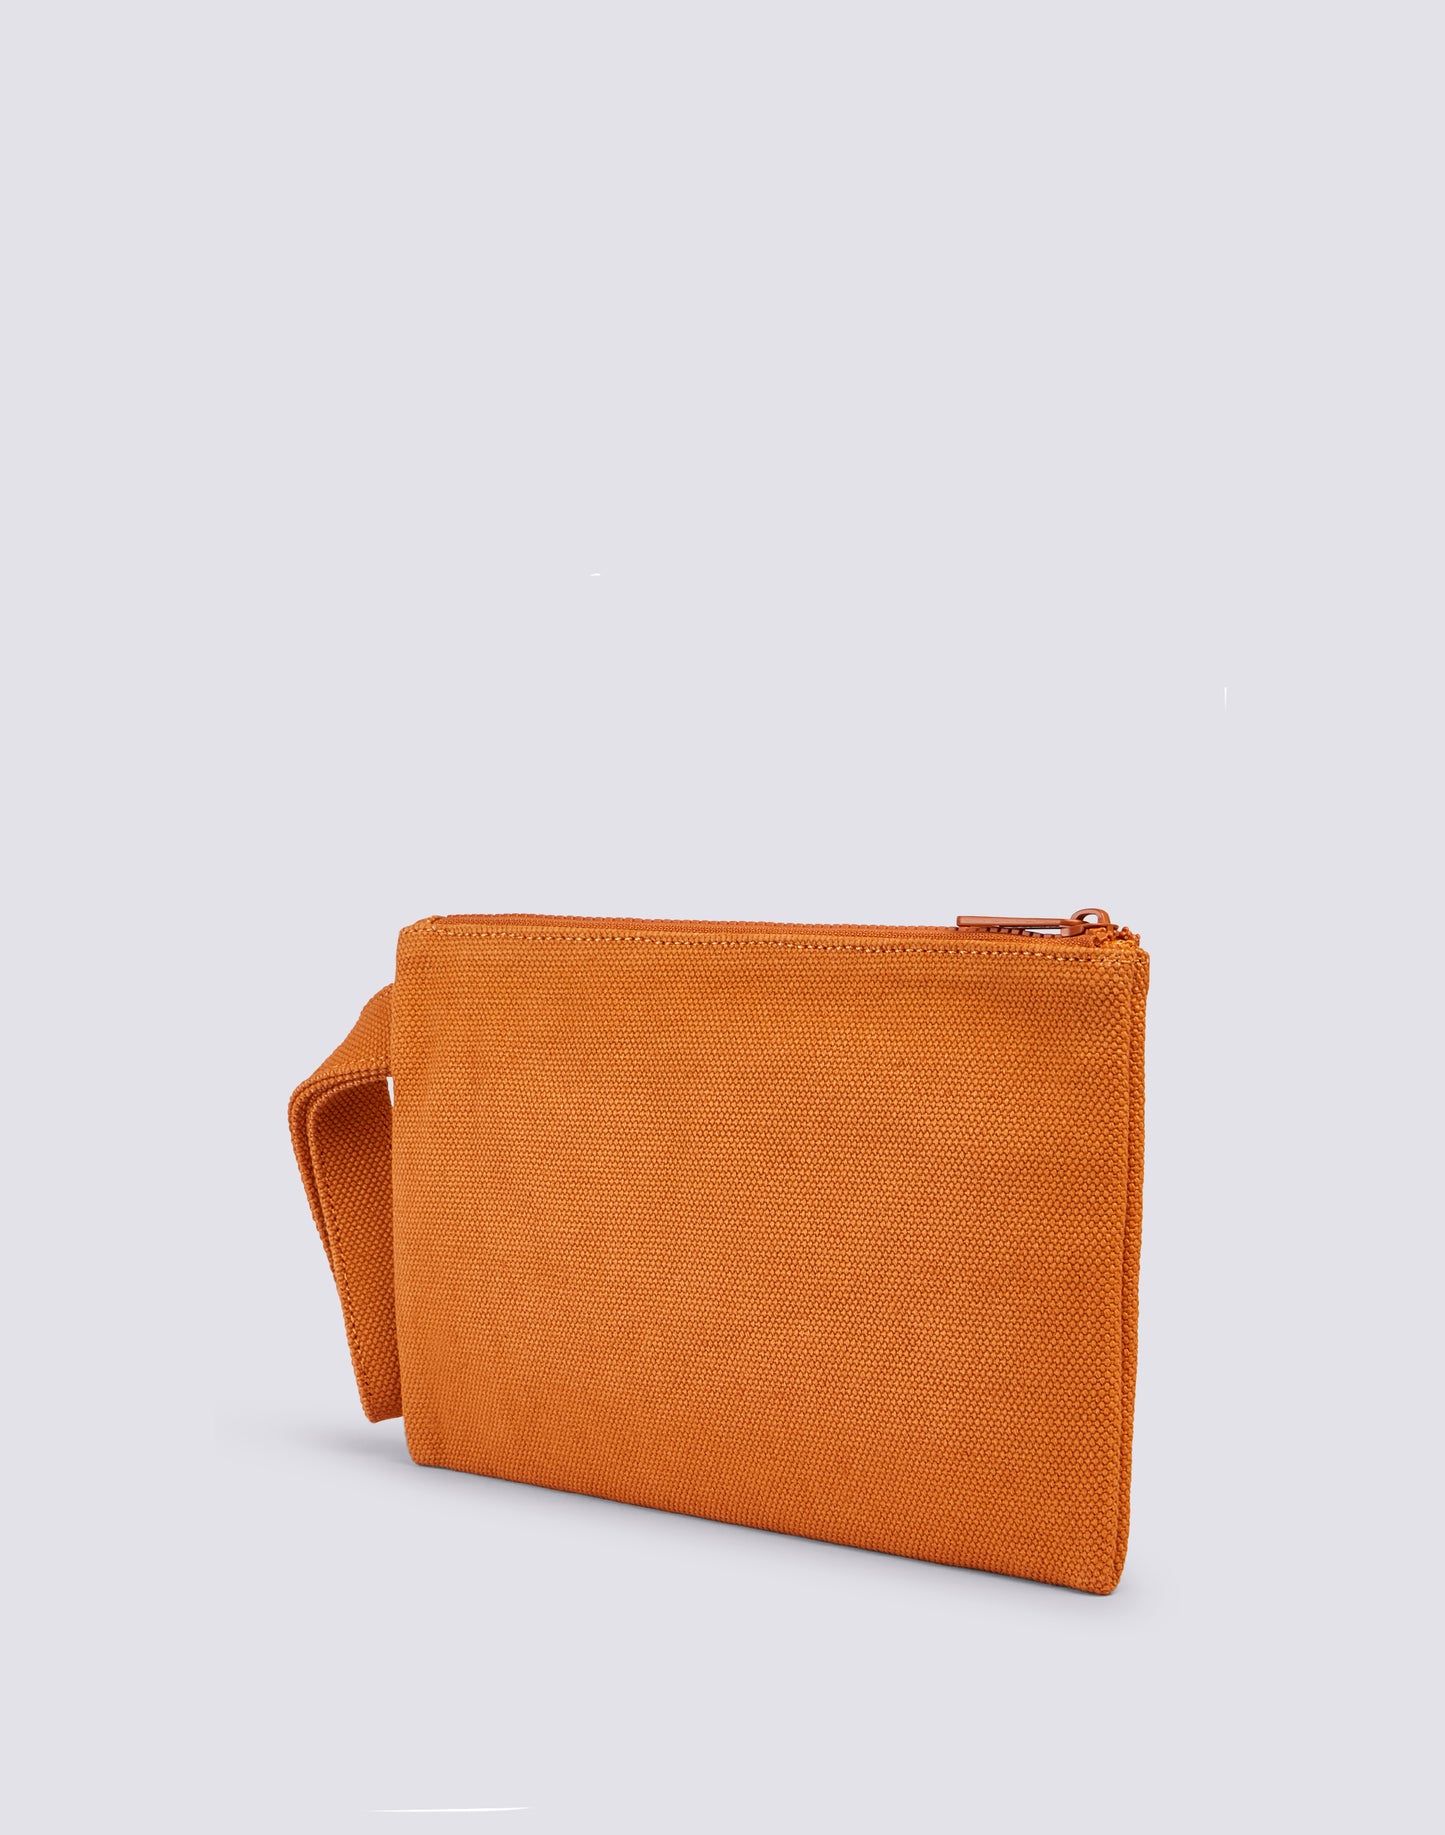 CLUTCH IN COTTON CANVAS STONE WASHED